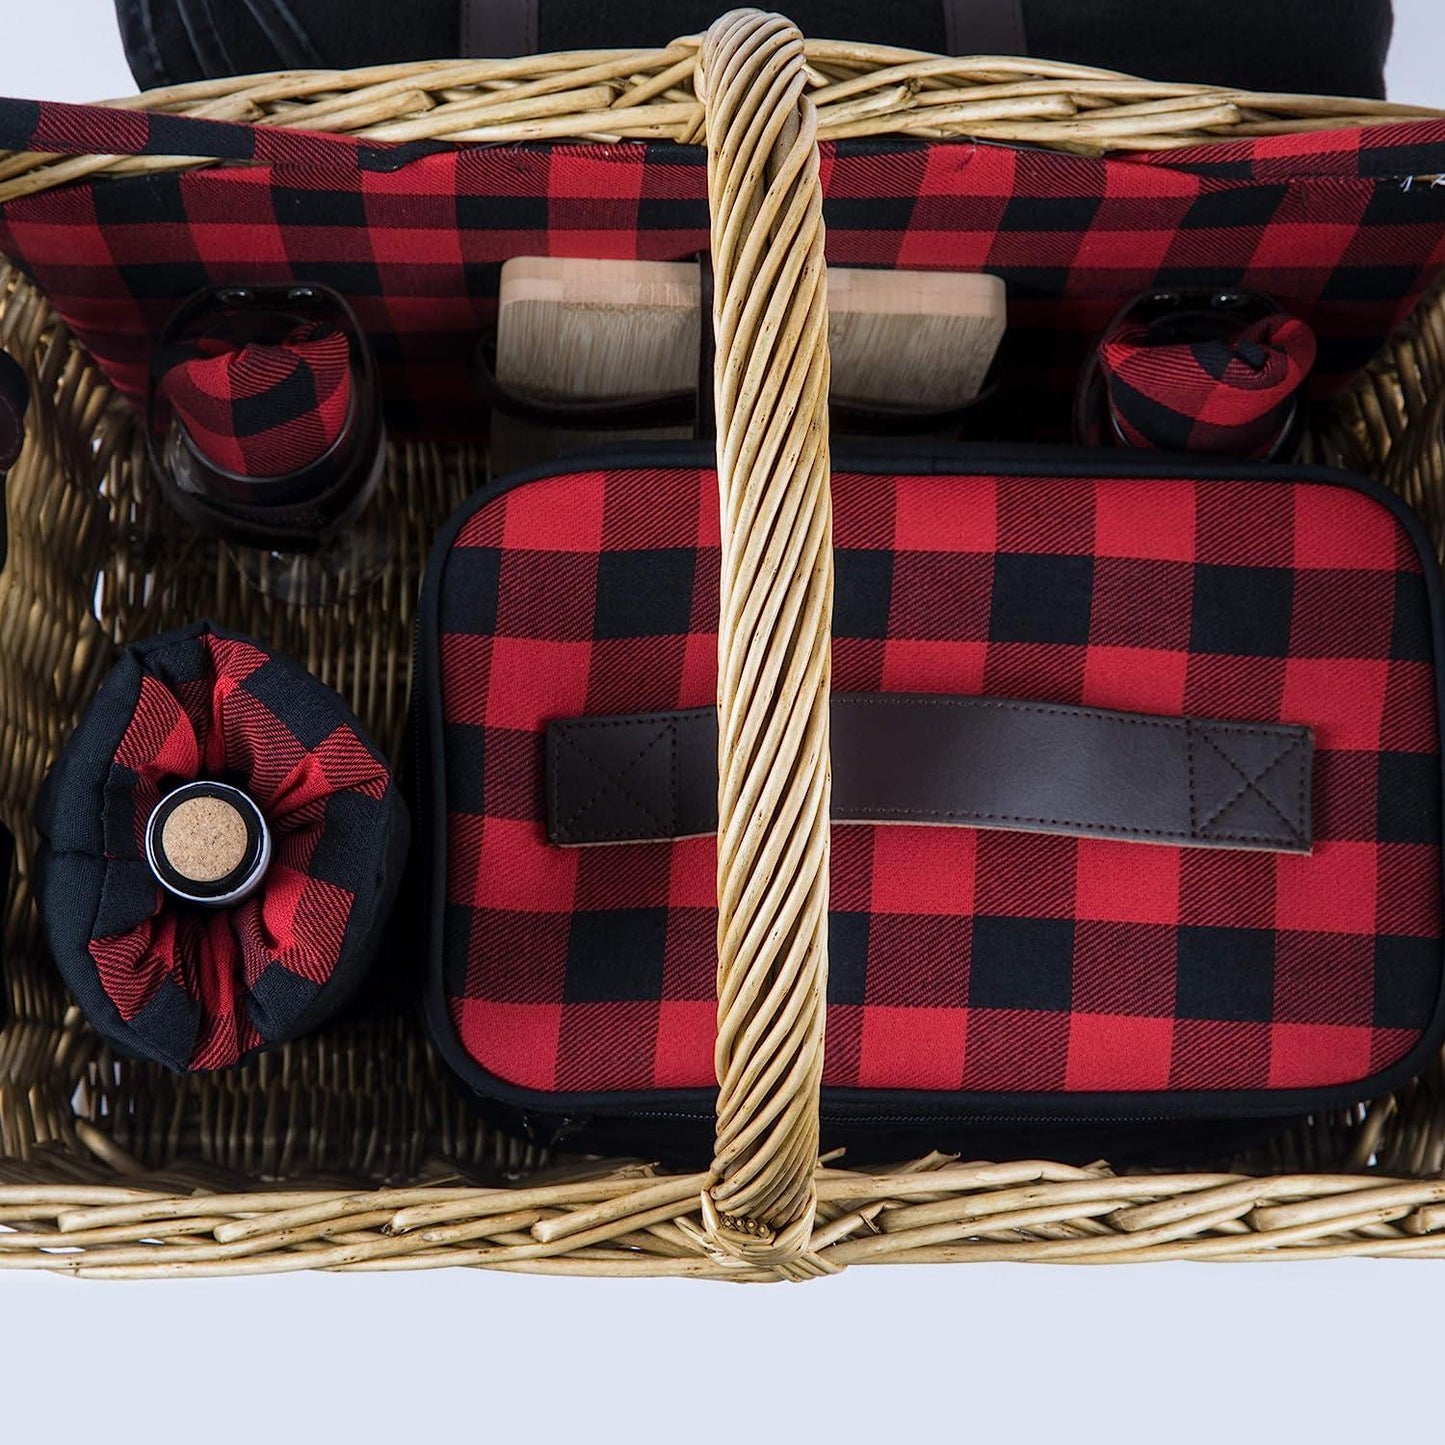 PICNIC TIME Somerset Deluxe Blanket, Soft Cooler Bag, and Romantic Picnic Wine Basket, One Size, Red/Black